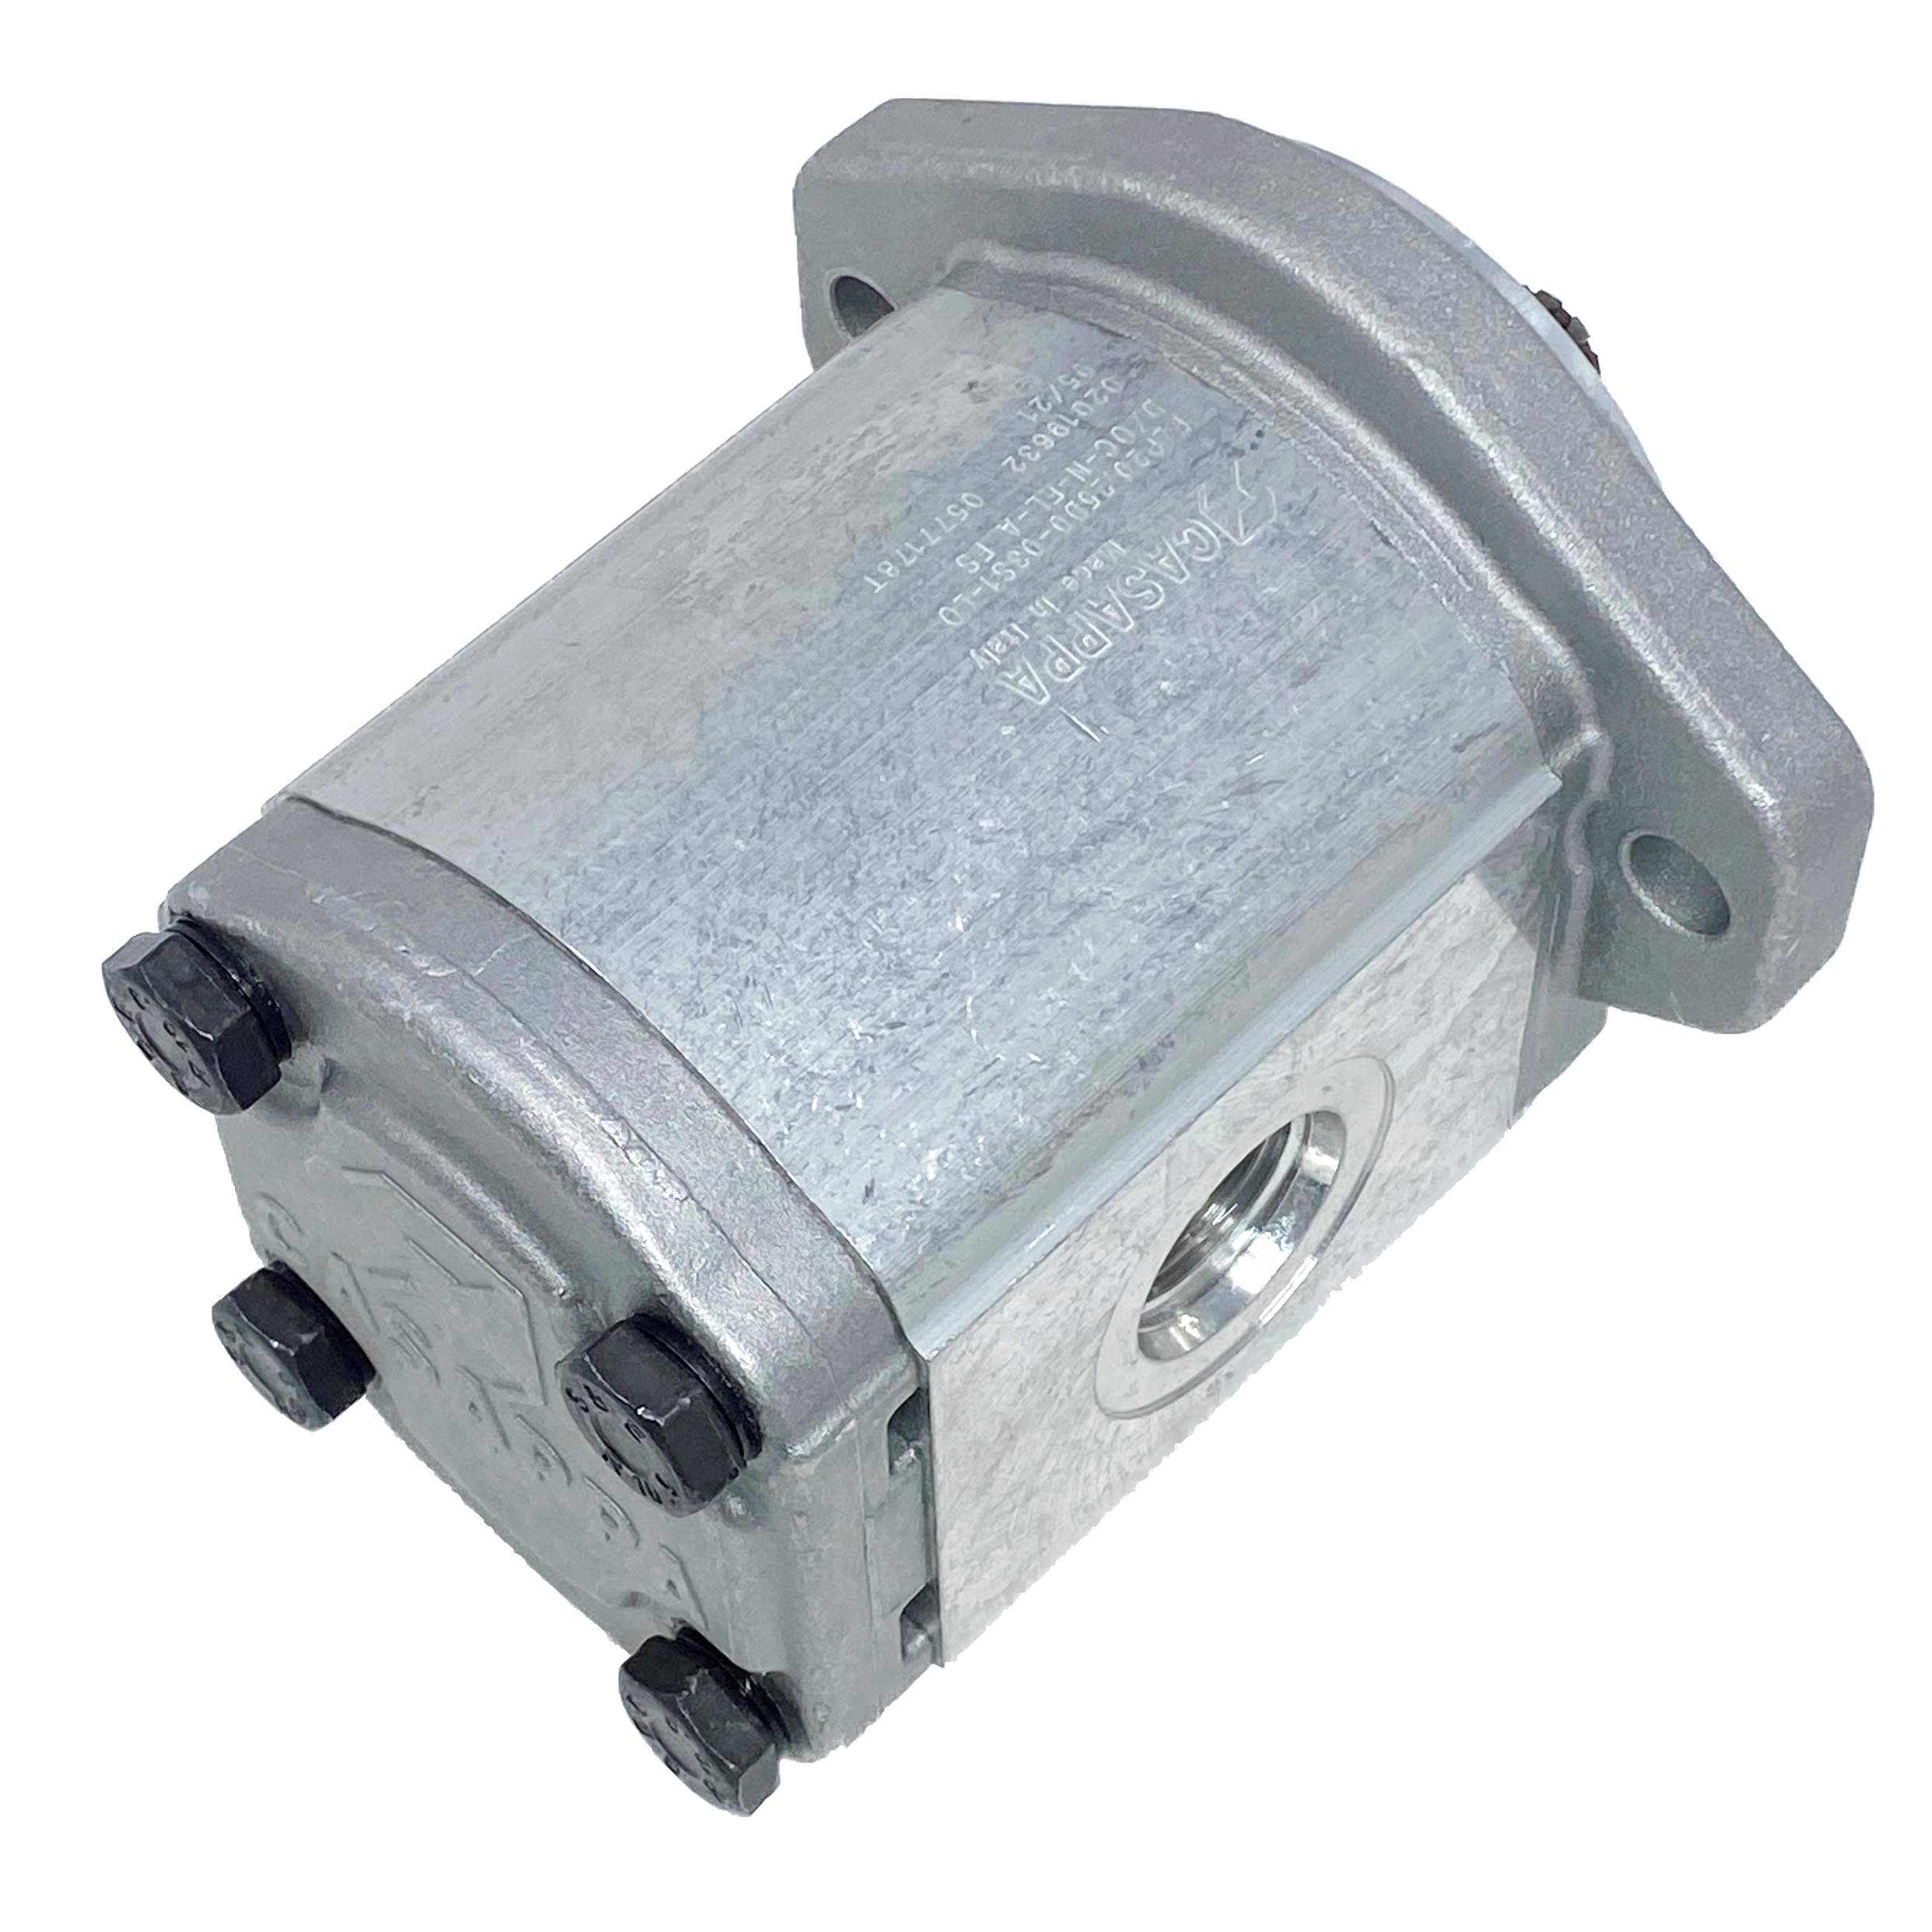 PHP20.25S0-07S9-LOG/OC-N-EL : Casappa Polaris Gear Pump, 26.42cc, 3335psi Rated, 3000RPM, CCW, 11T 16/32dp Shaft, SAE A 2-Bolt Flange, 1.25" #20 SAE Inlet, 0.625 (5/8") #10 SAE Outlet, Cast Iron Body, Aluminum Flange